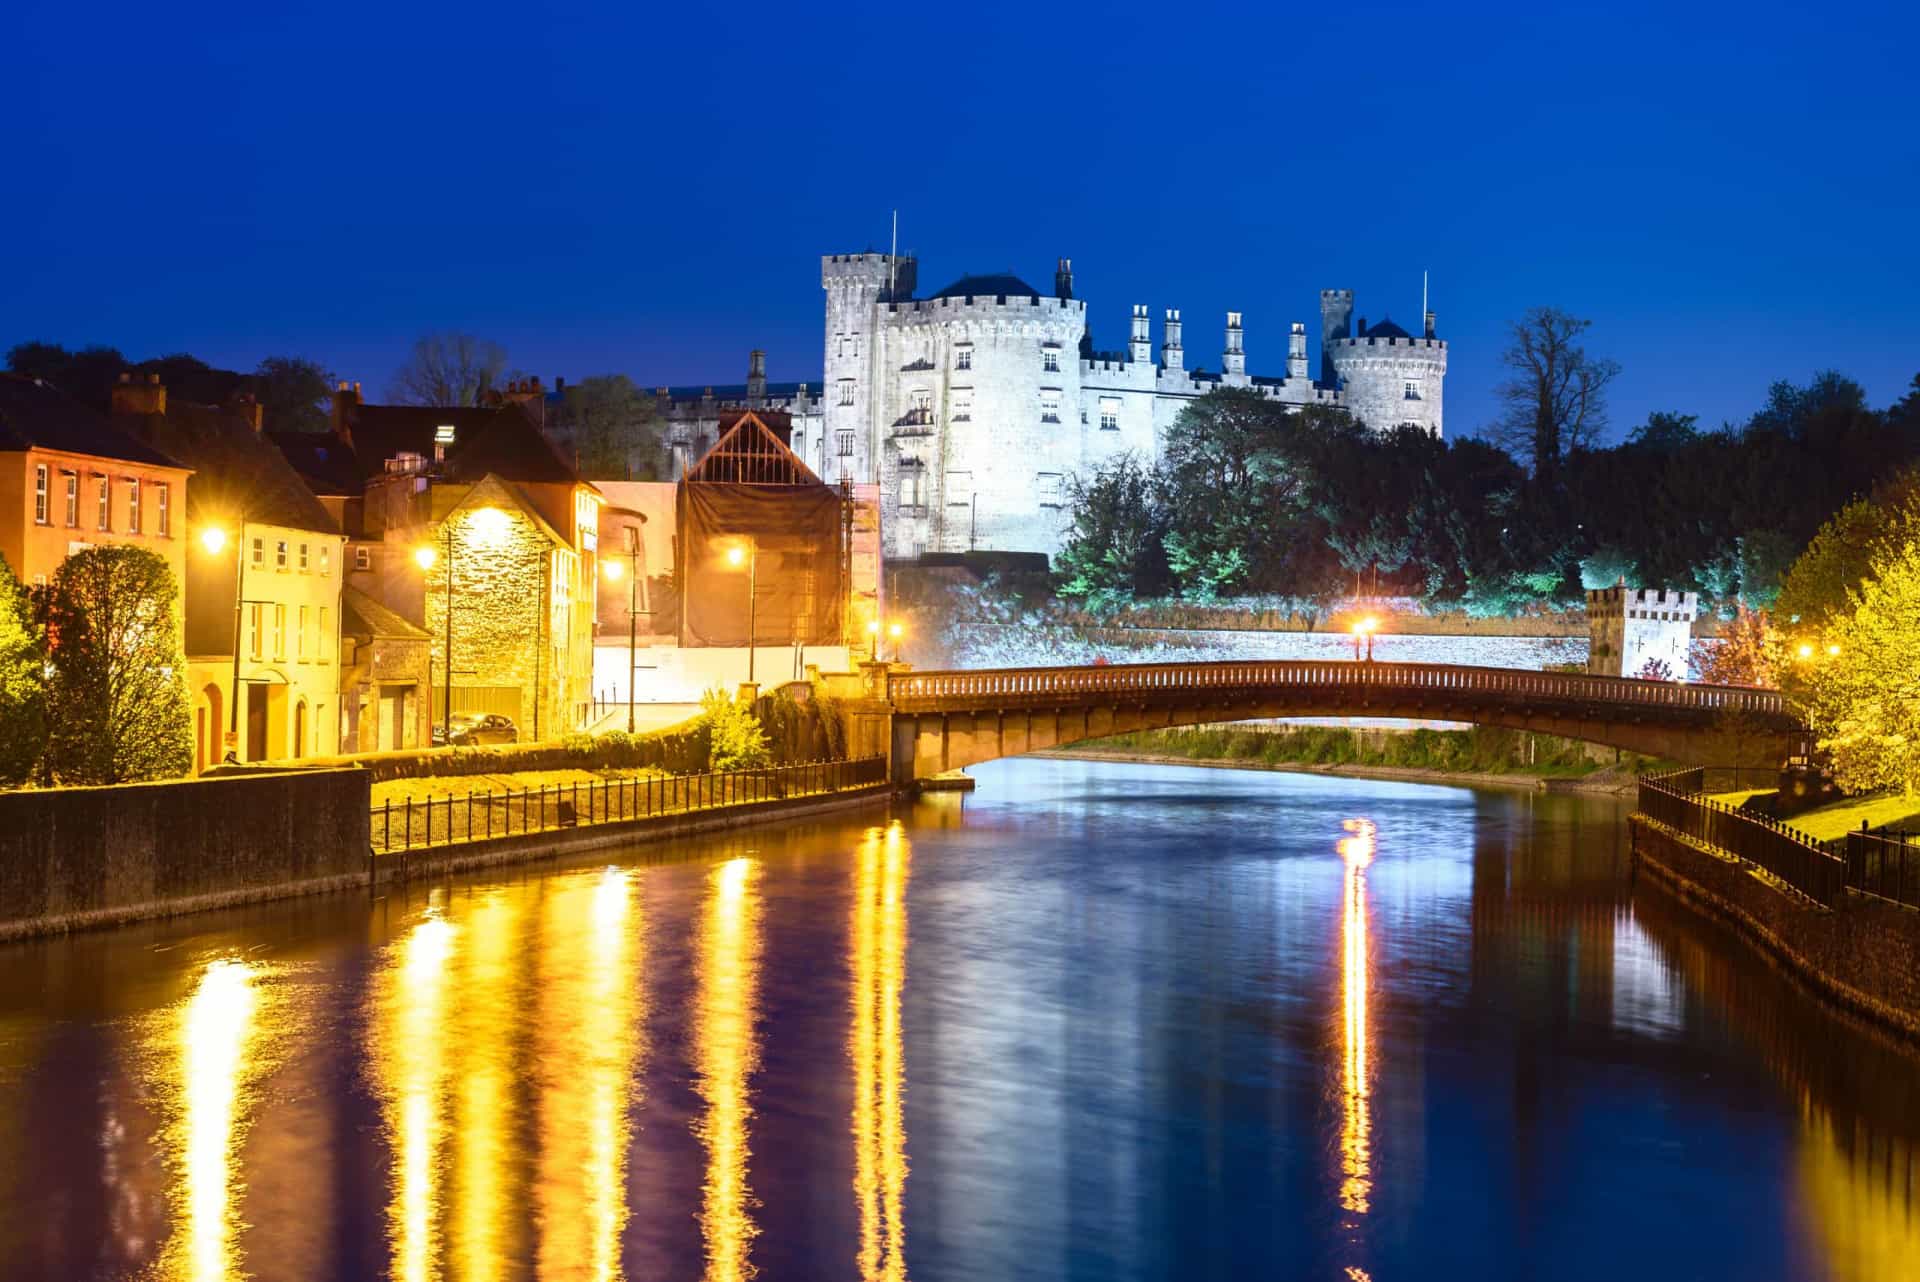 <p>A city in fact rather than a town, Kilkenny nonetheless exudes a picturesque charm all of its own, built as it is on both banks of the Nore river and graced with Kilkenny Castle, the signature symbol of this historic medieval destination.</p>